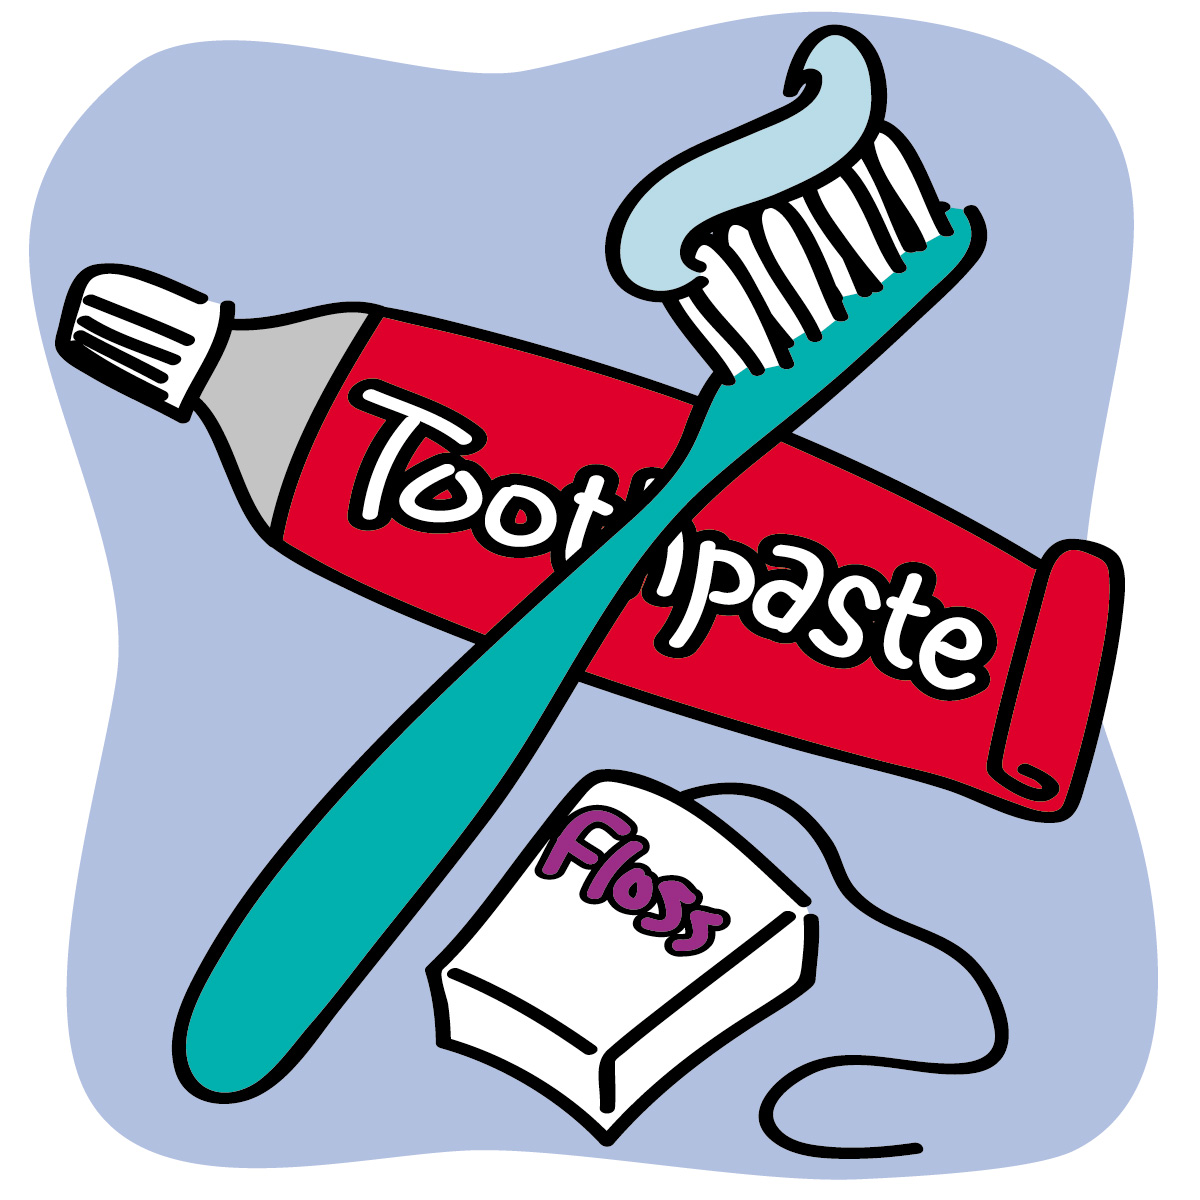 Free clipart toothbrush and toothpaste